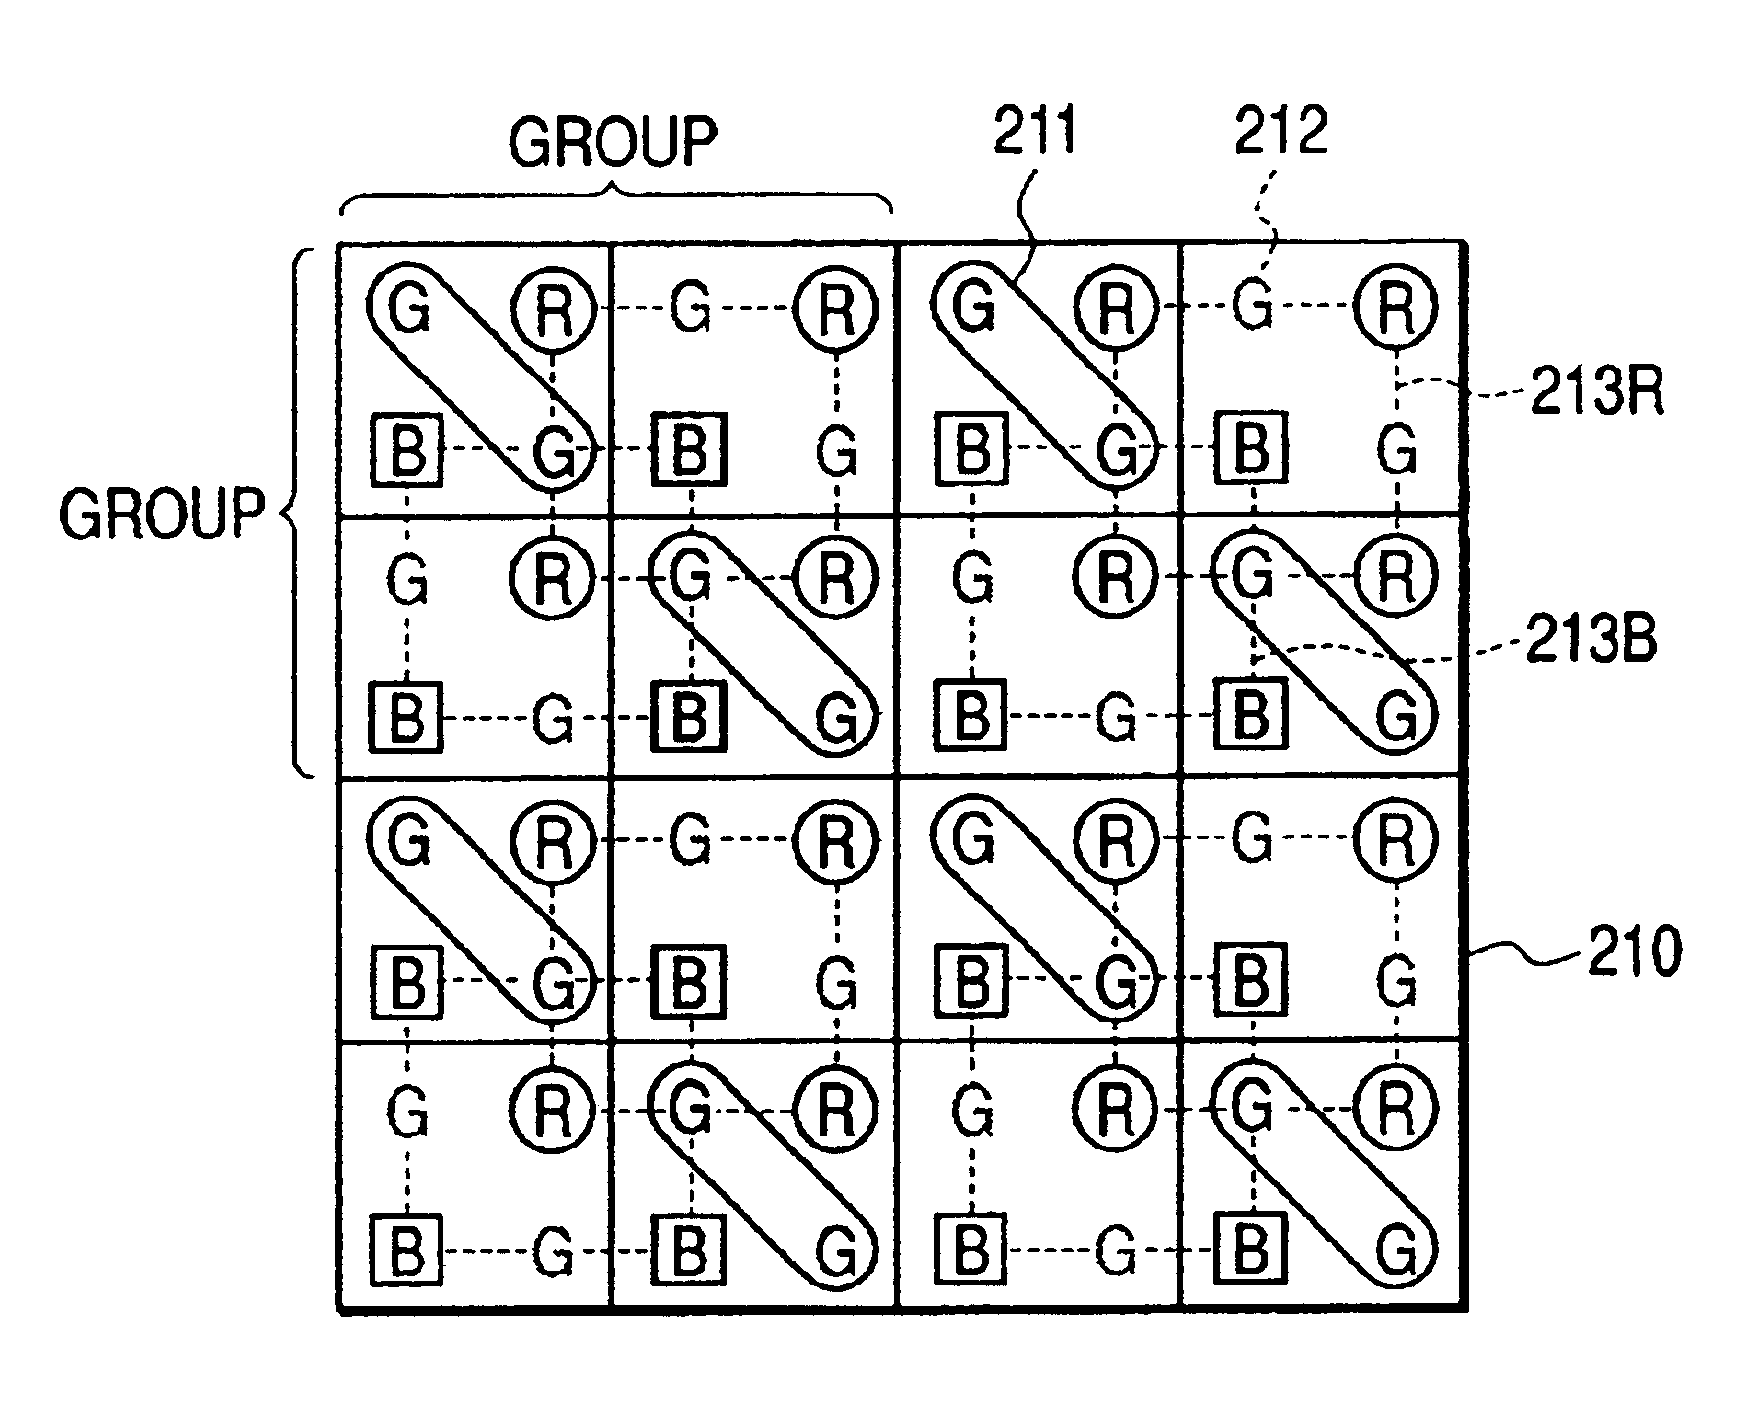 Image pickup apparatus having plural pixels arranged two-dimensionally, and selective addition of different pixel color signals to control spatial color arrangement